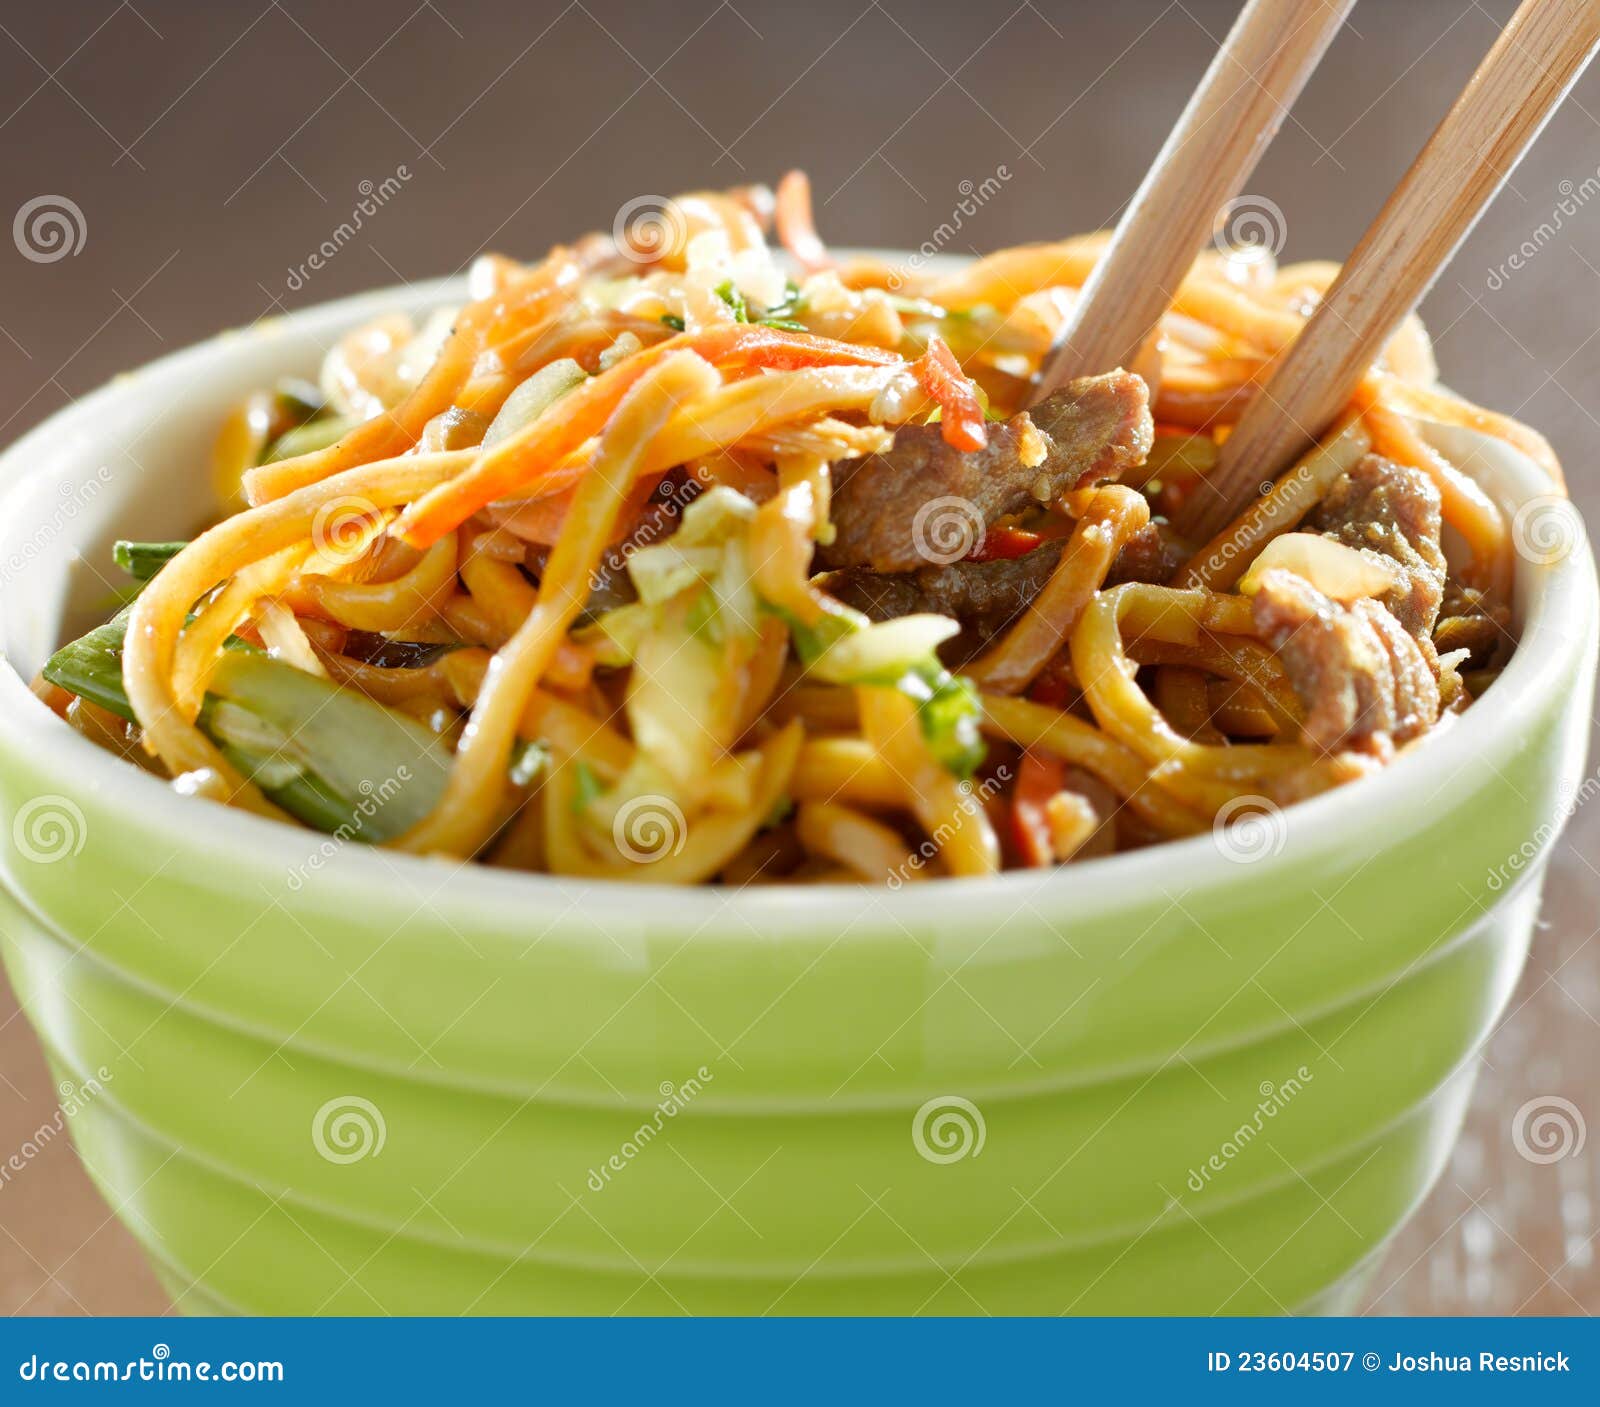 bowl of beef lo mien in a bowl with chopsticks